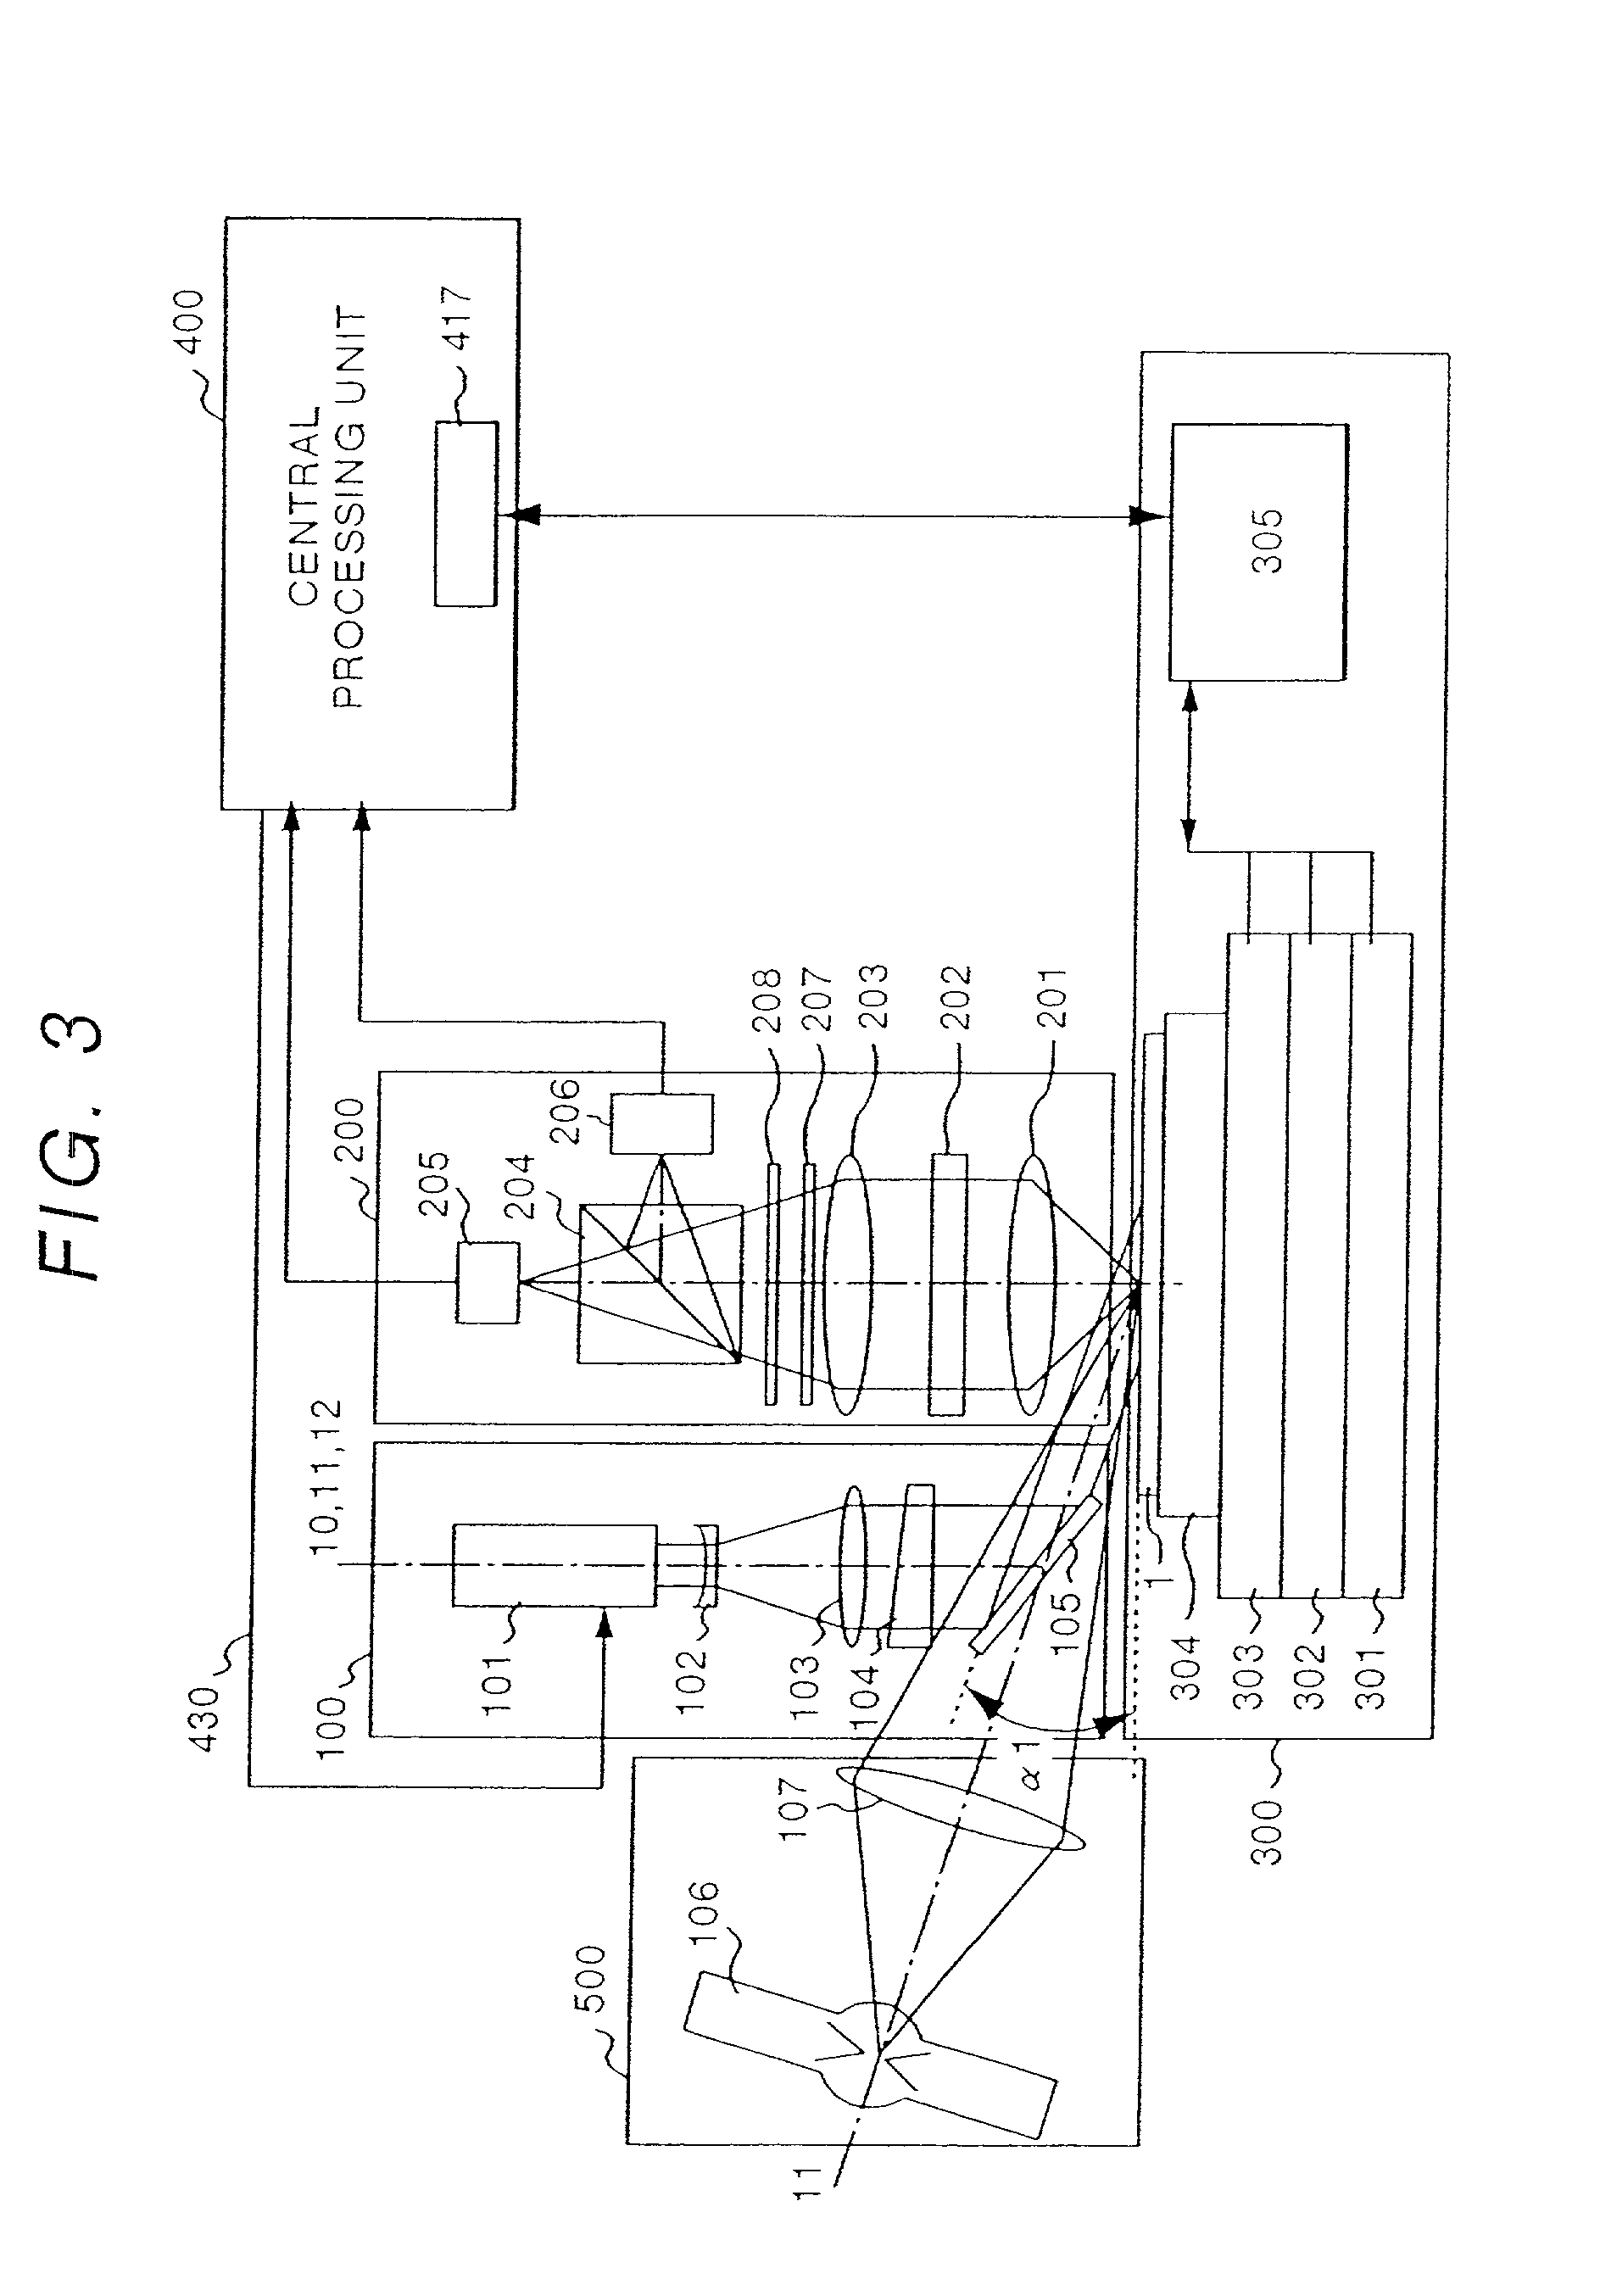 Apparatus and method for testing defects